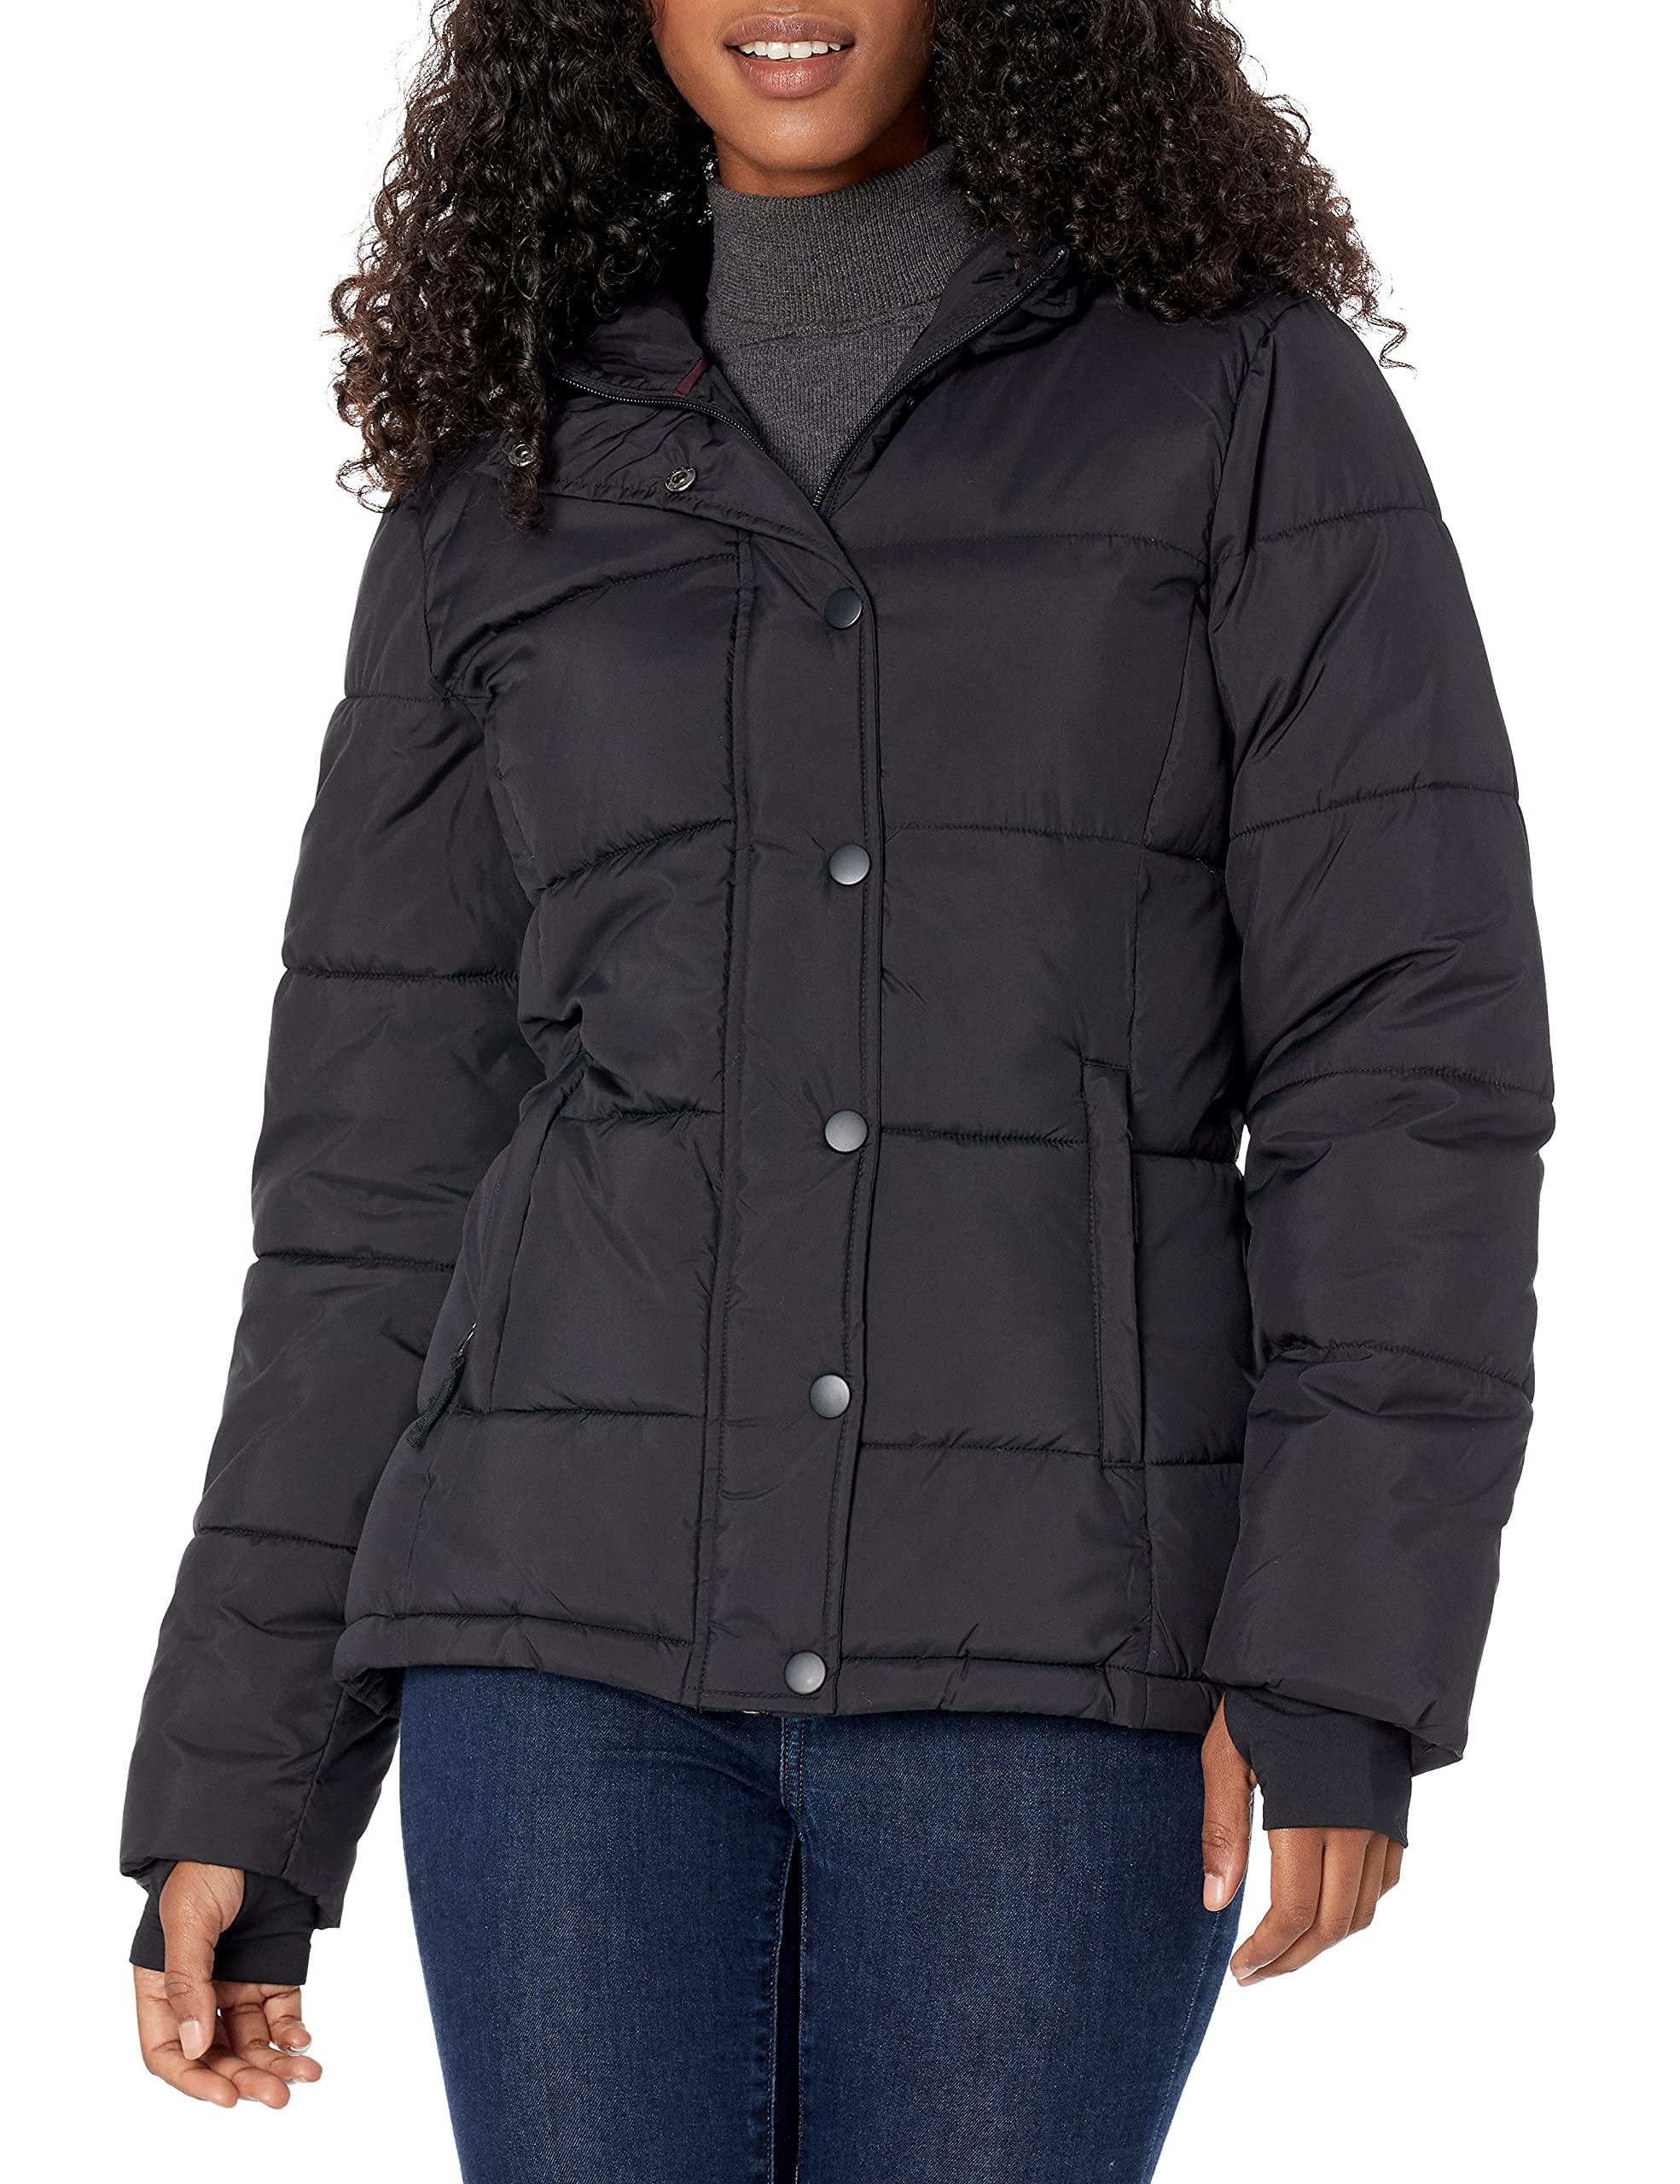 Amazon Essentials Women's Heavyweight Long-Sleeve Hooded Puffer Coat (Available in Plus Size)